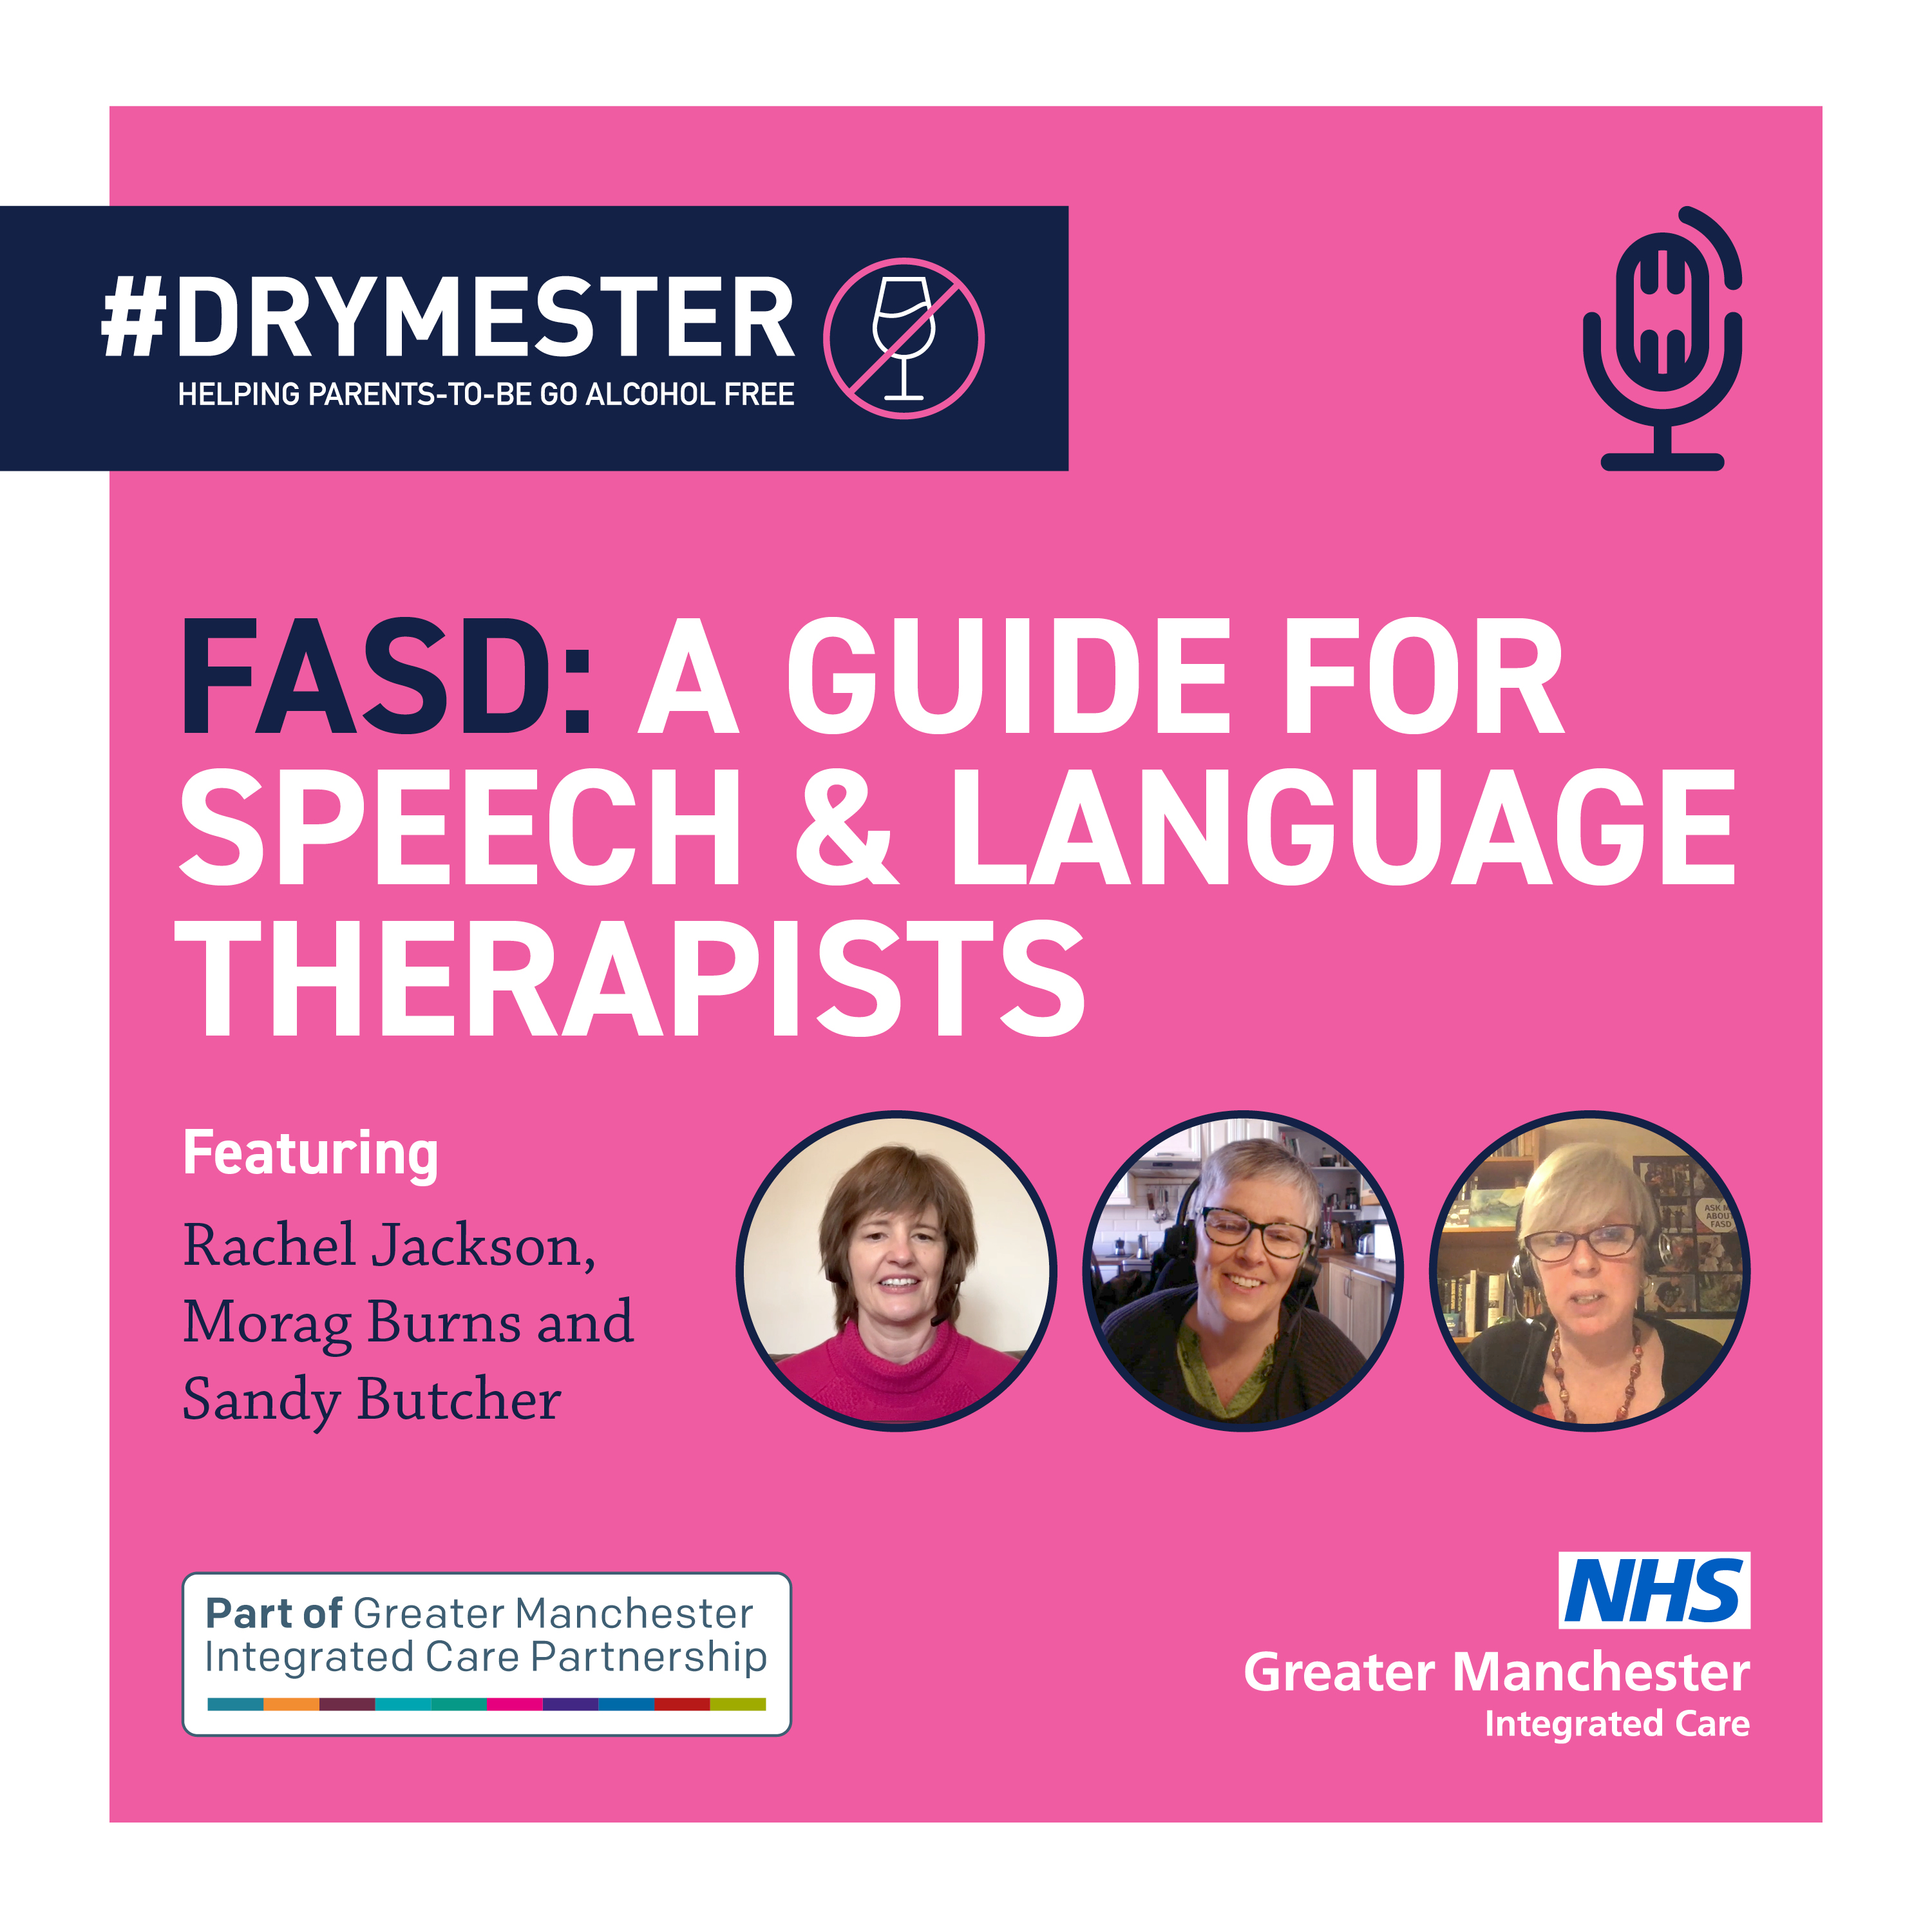 FASD: A Guide for Speech & Language Therapists